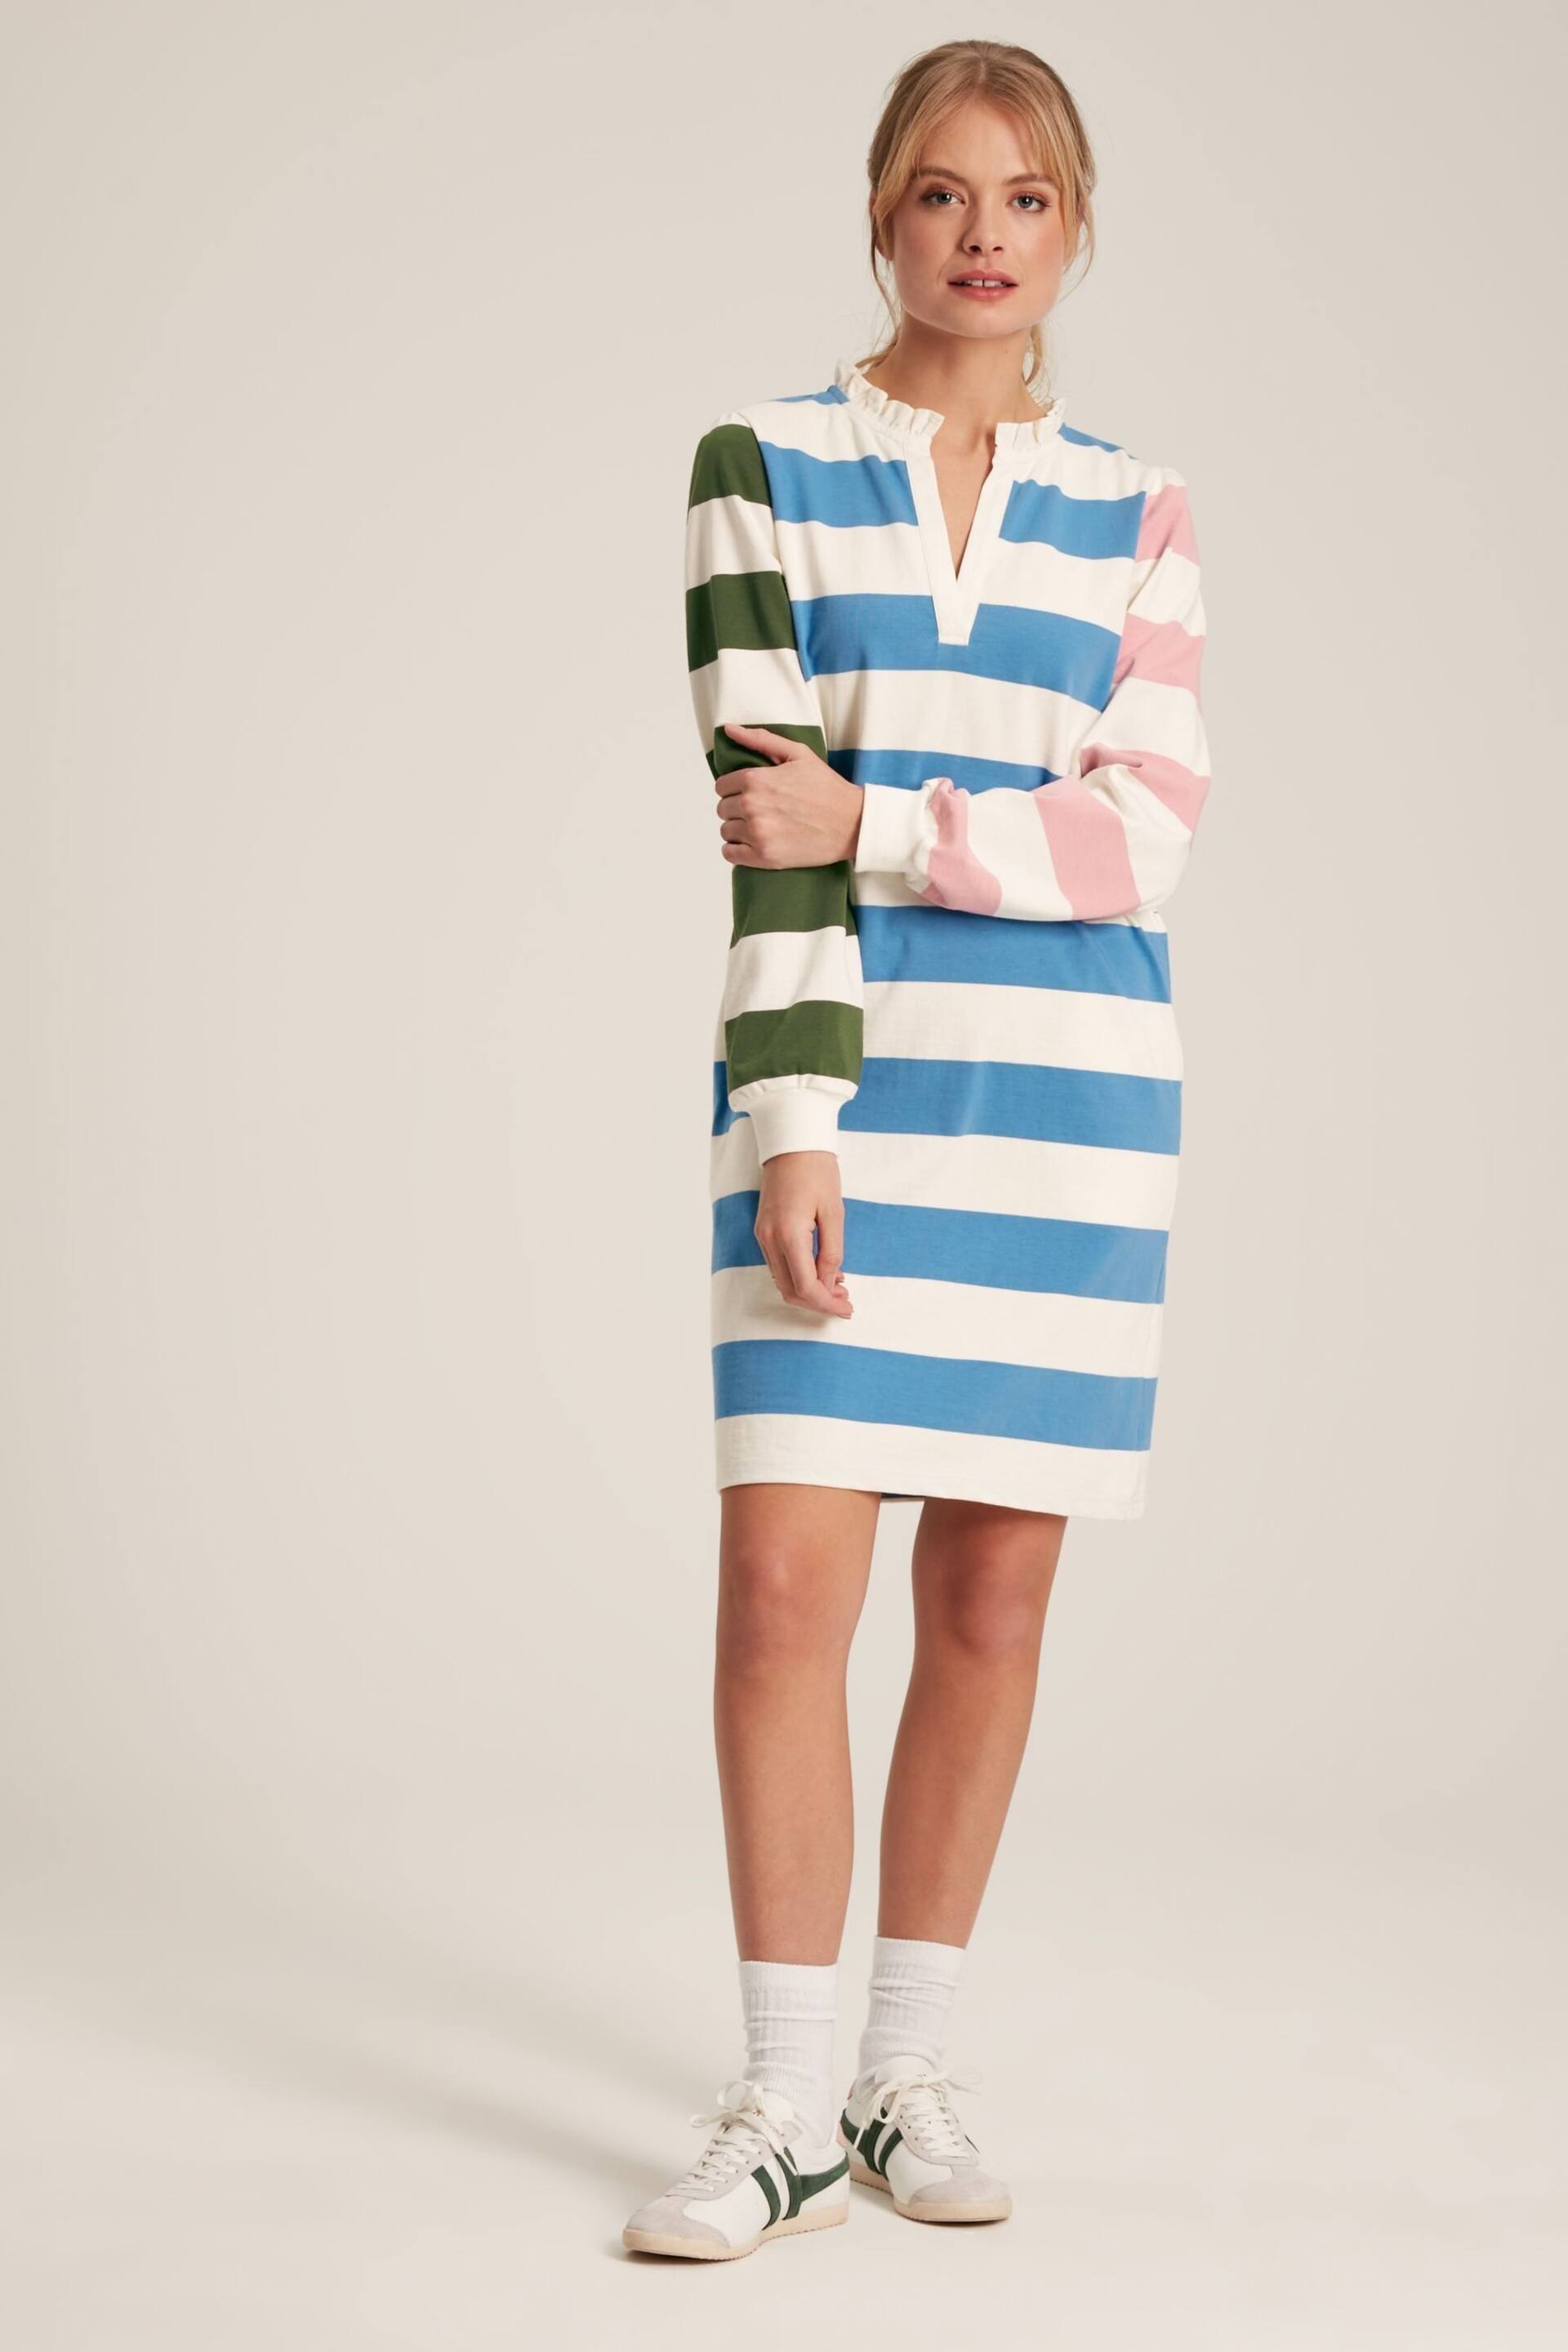 Joules Sophia Multi Striped Cotton Rugby Shirt Dress - Image 1 of 6